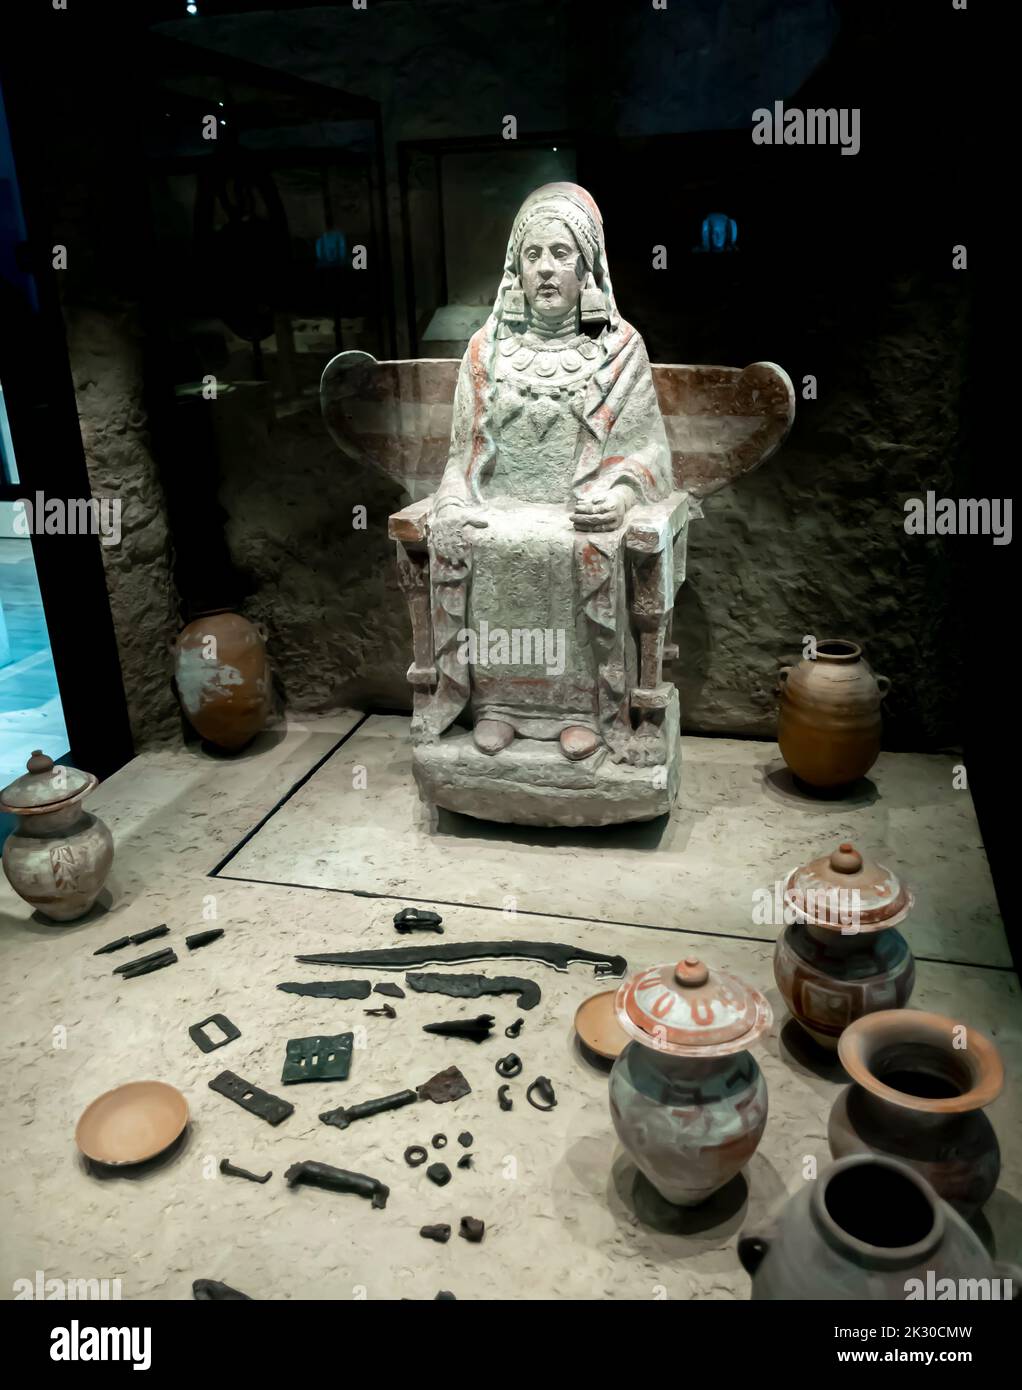 Lady at Baza. 350 BC. Sculpture and goods from grave 155 at Baza Basti, Baza, Granada, Spain. Sculpture of Baza Woman on throne used as cinerary Stock Photo